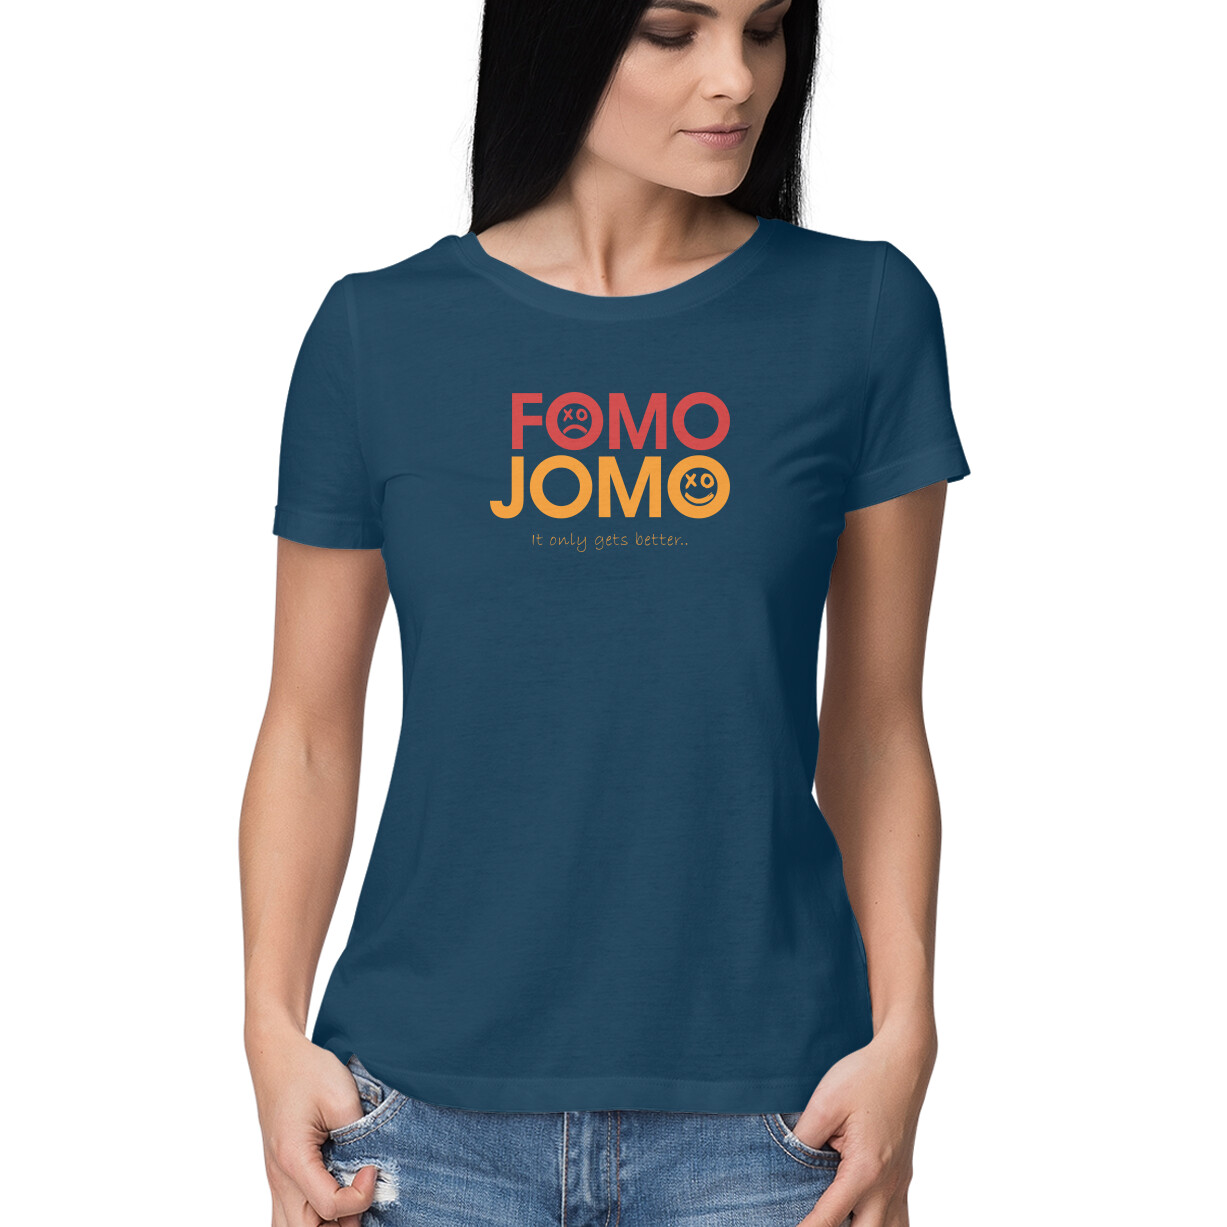 Fomo jomo it only gets better, Funny T-shirt quotes and sayings